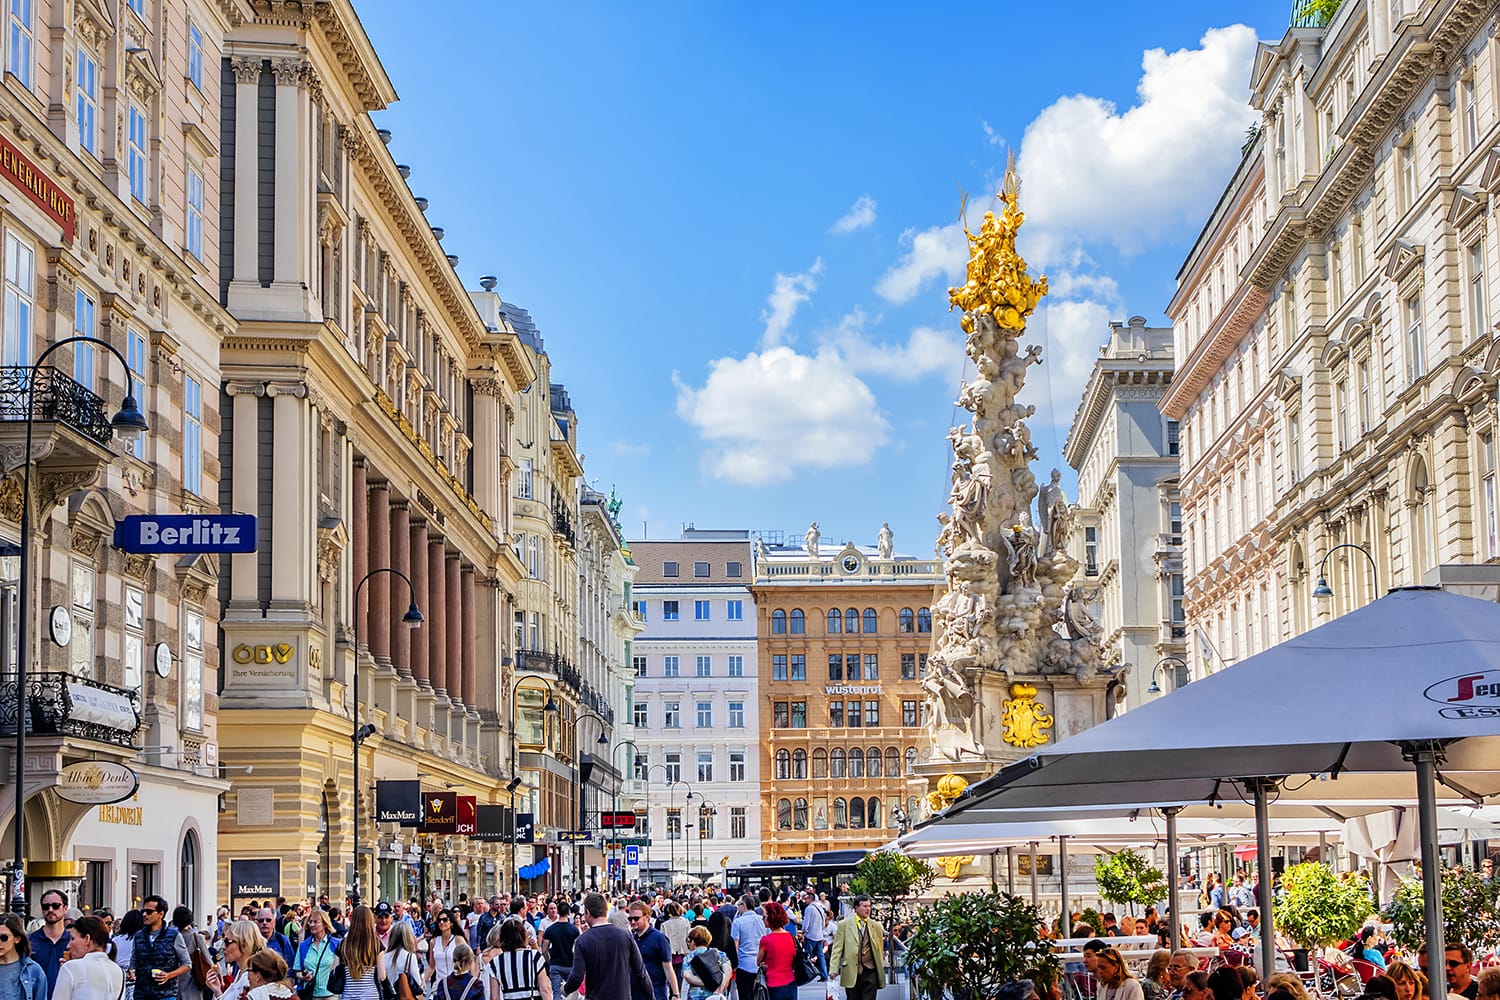 The Graben street - one of the most famous streets in Vienna first district, the city centre. Graben has served as a marketplace from the very beginning.